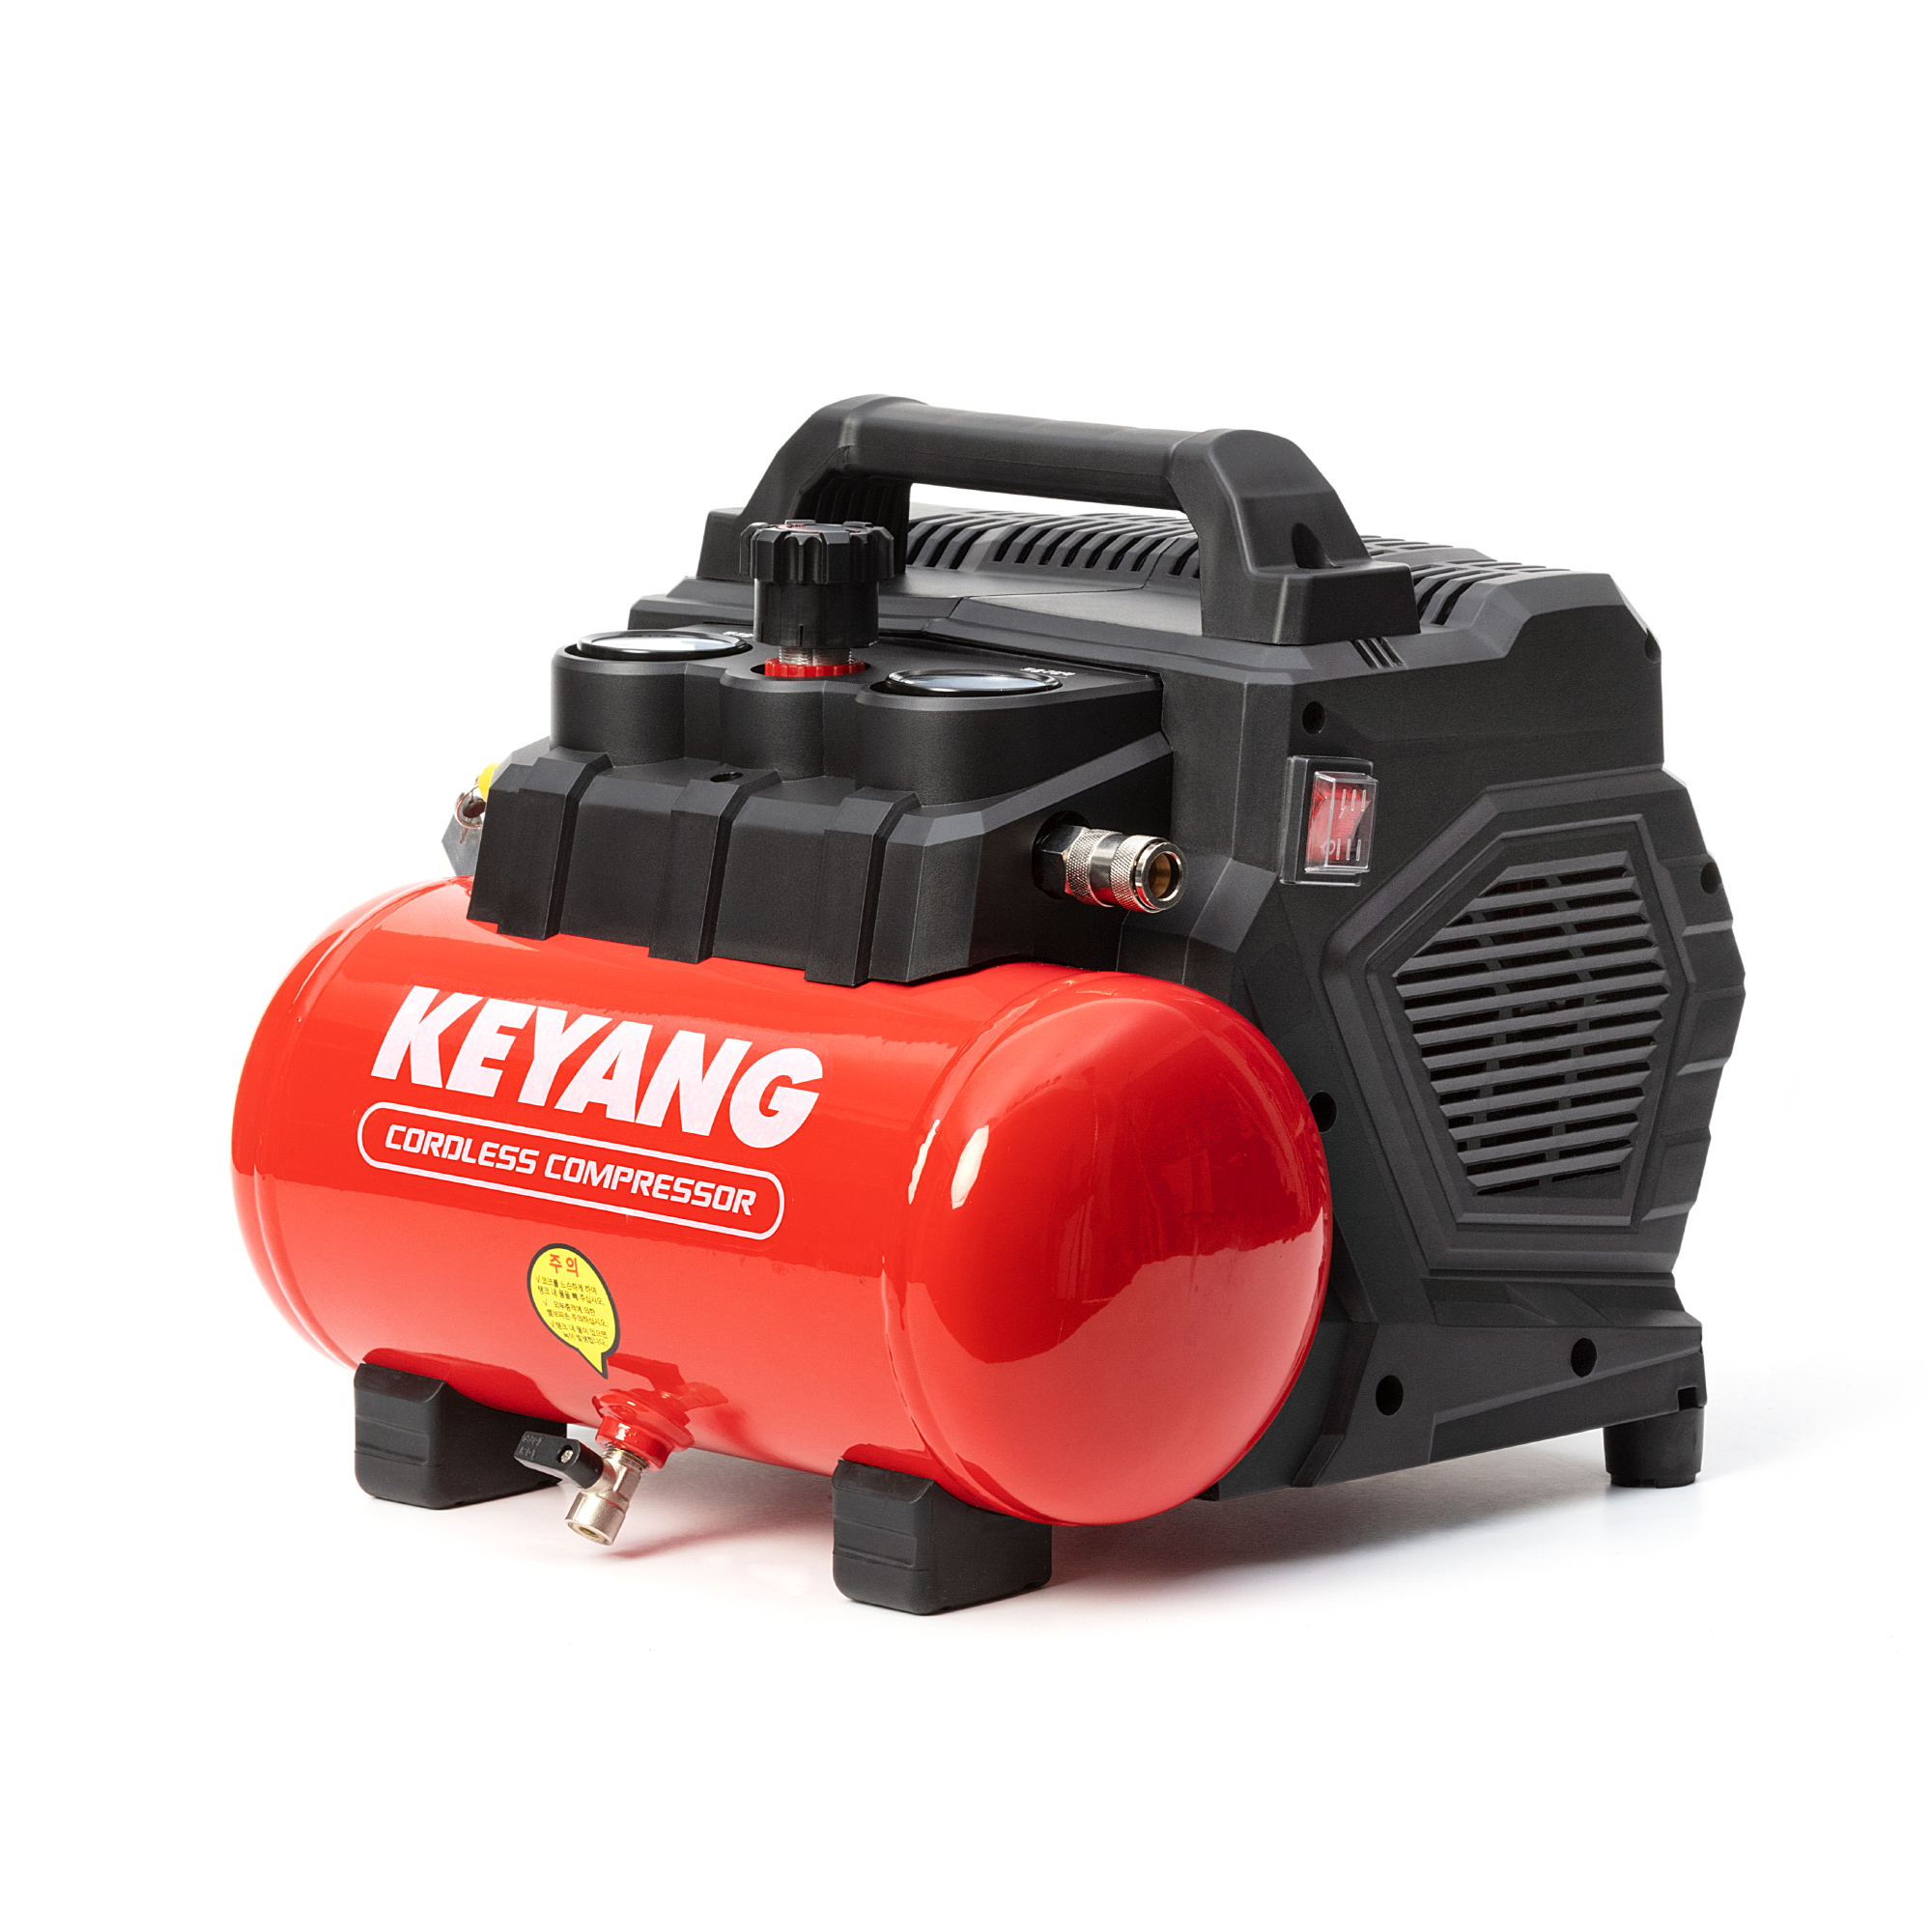 Cordless And Oil-Free Battery Powered Air Compressor